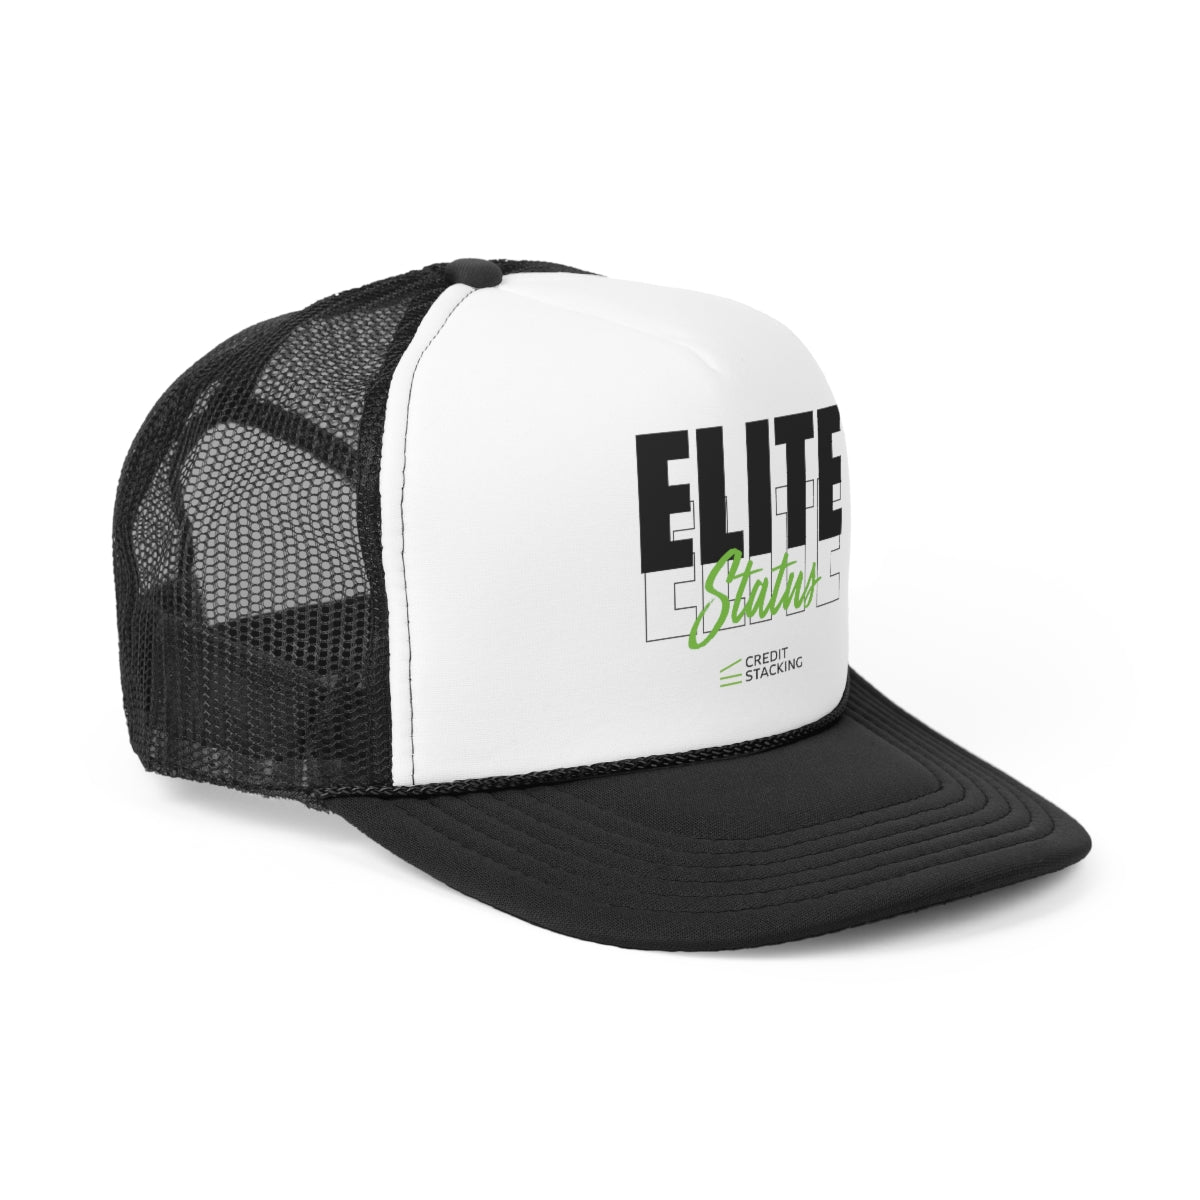 Limited Edition Credit Stacking Elite Status Trucker Hat